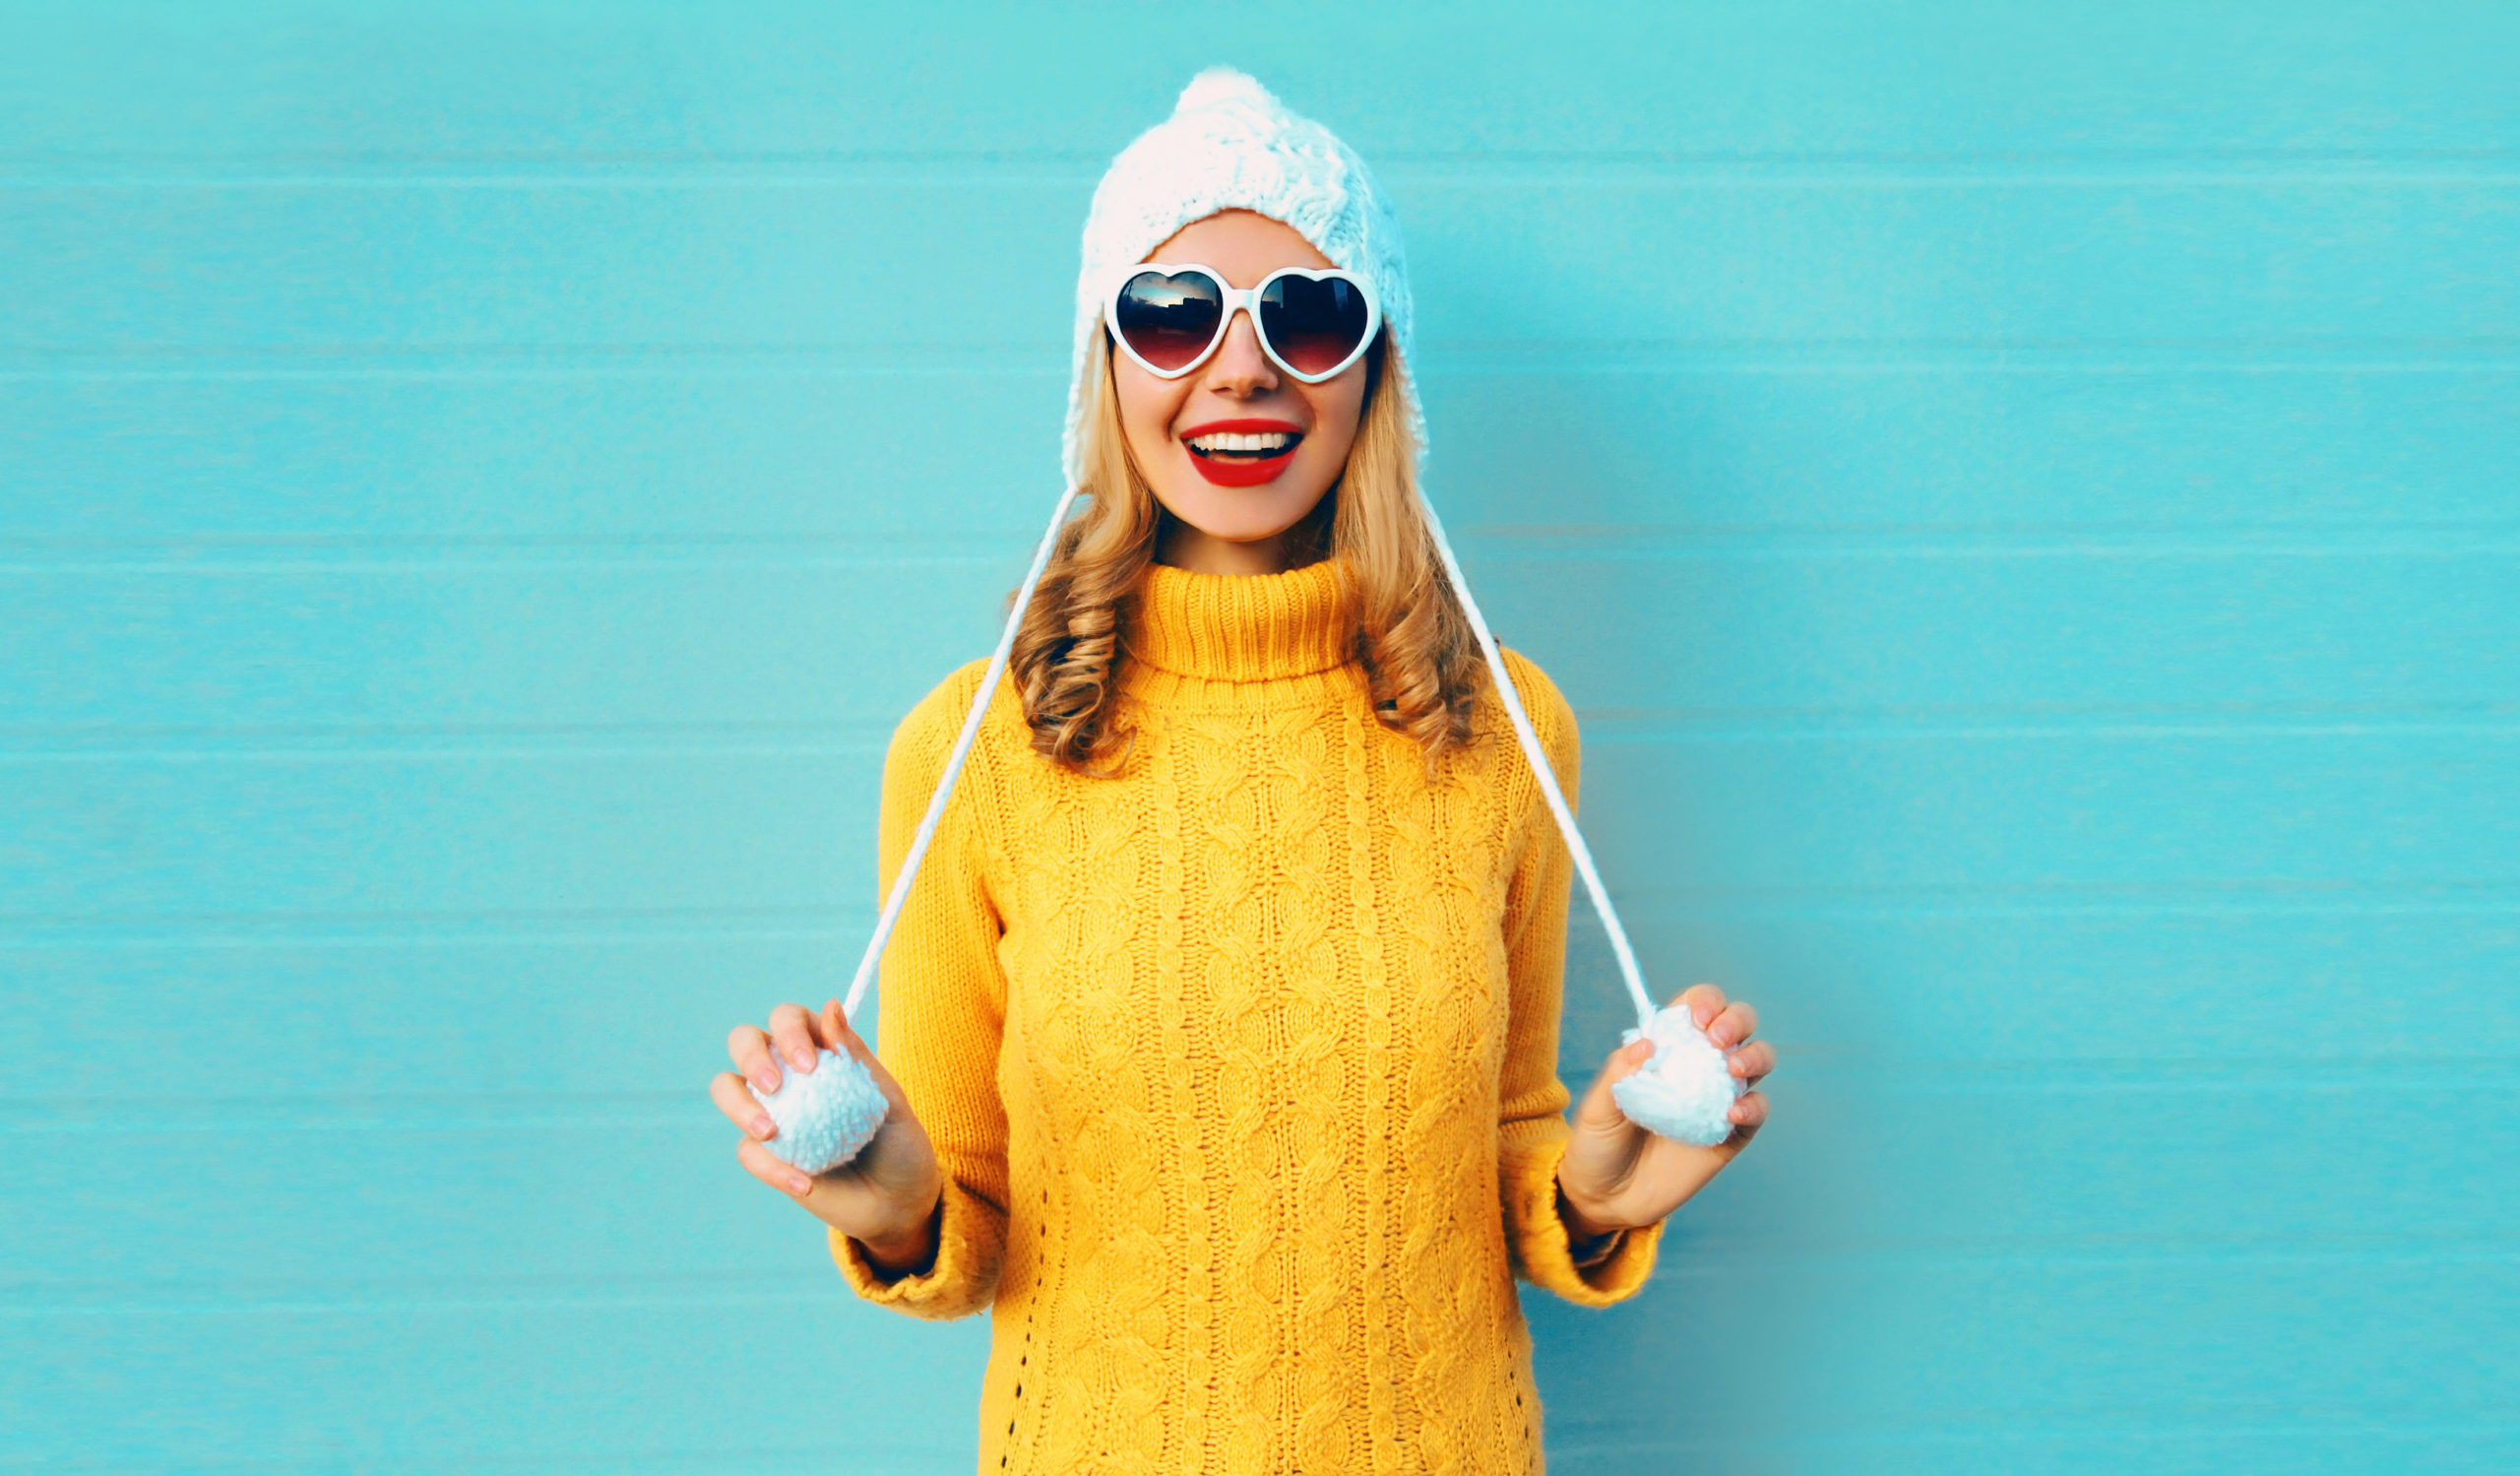 Winter portrait happy smiling young woman having fun wearing yellow knitted sweater and white hat with pom pom, heart shaped sunglasses on blue wall background